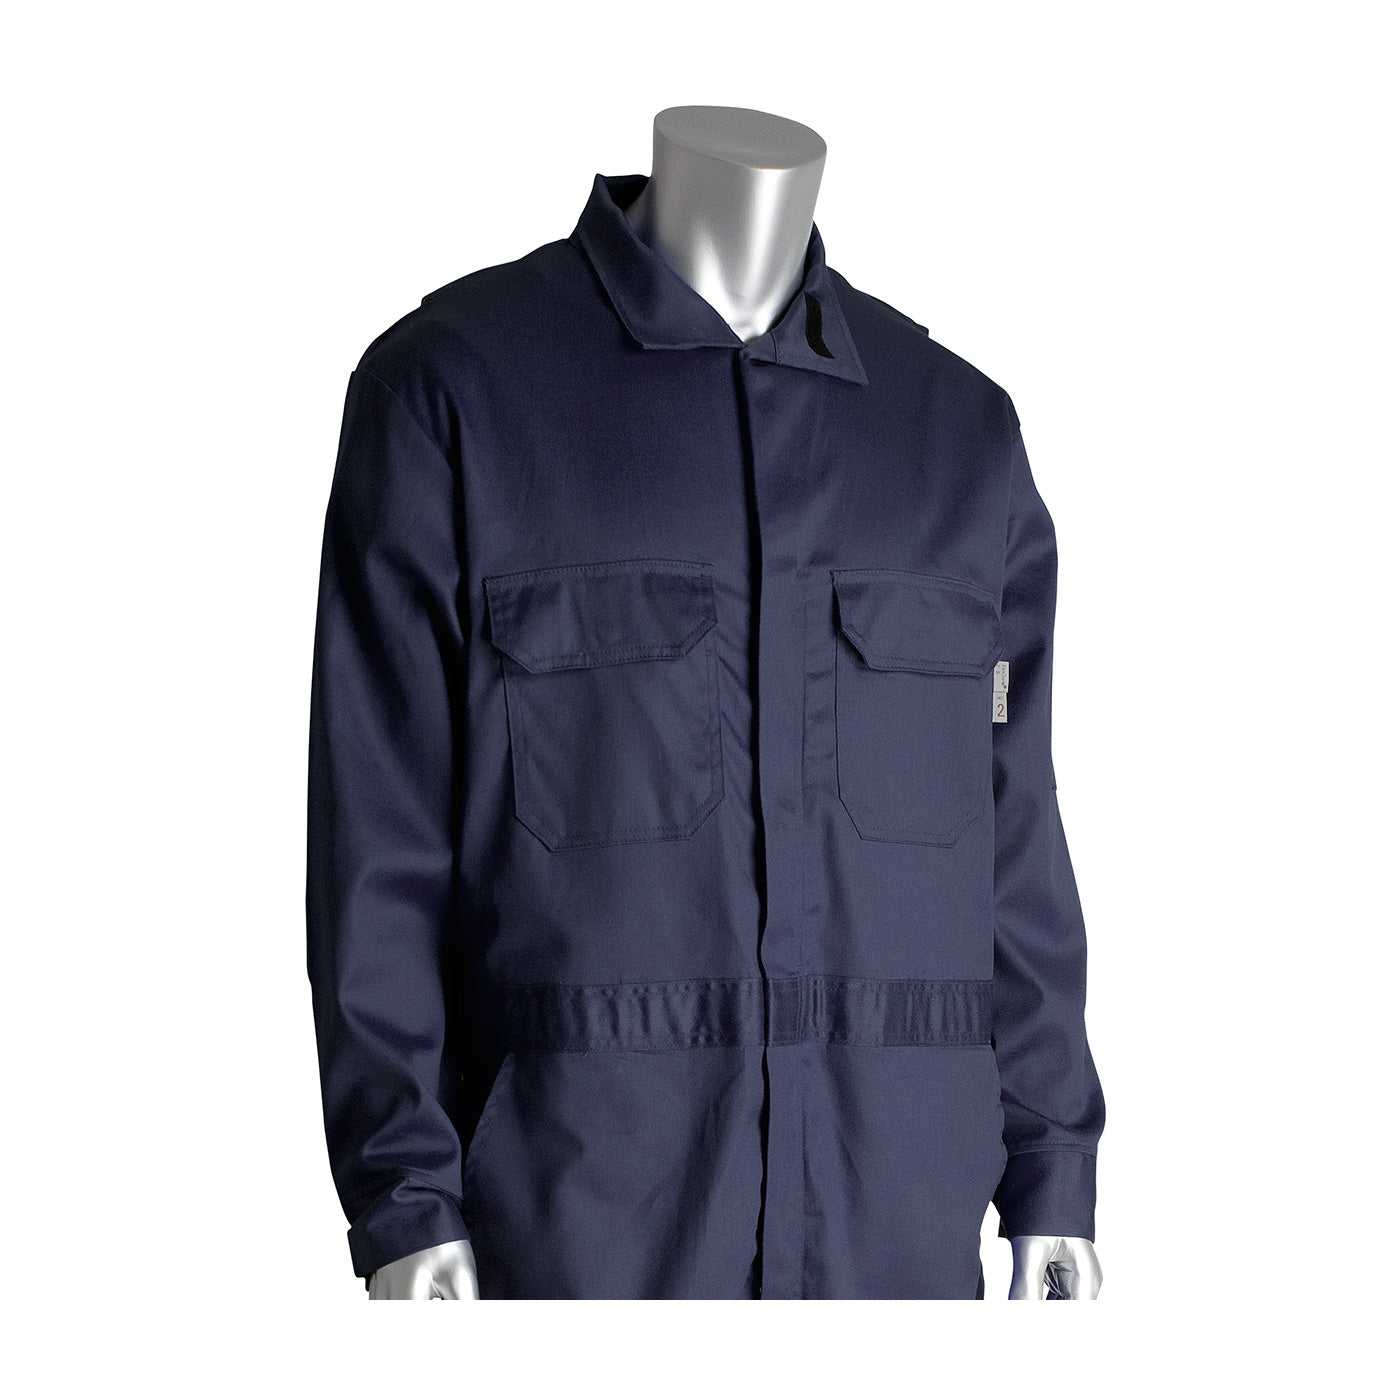 PIP 385-FRSC-NV/3X AR/FR Dual Certified Coverall with Zipper Closure - 9.2 Cal/cm2